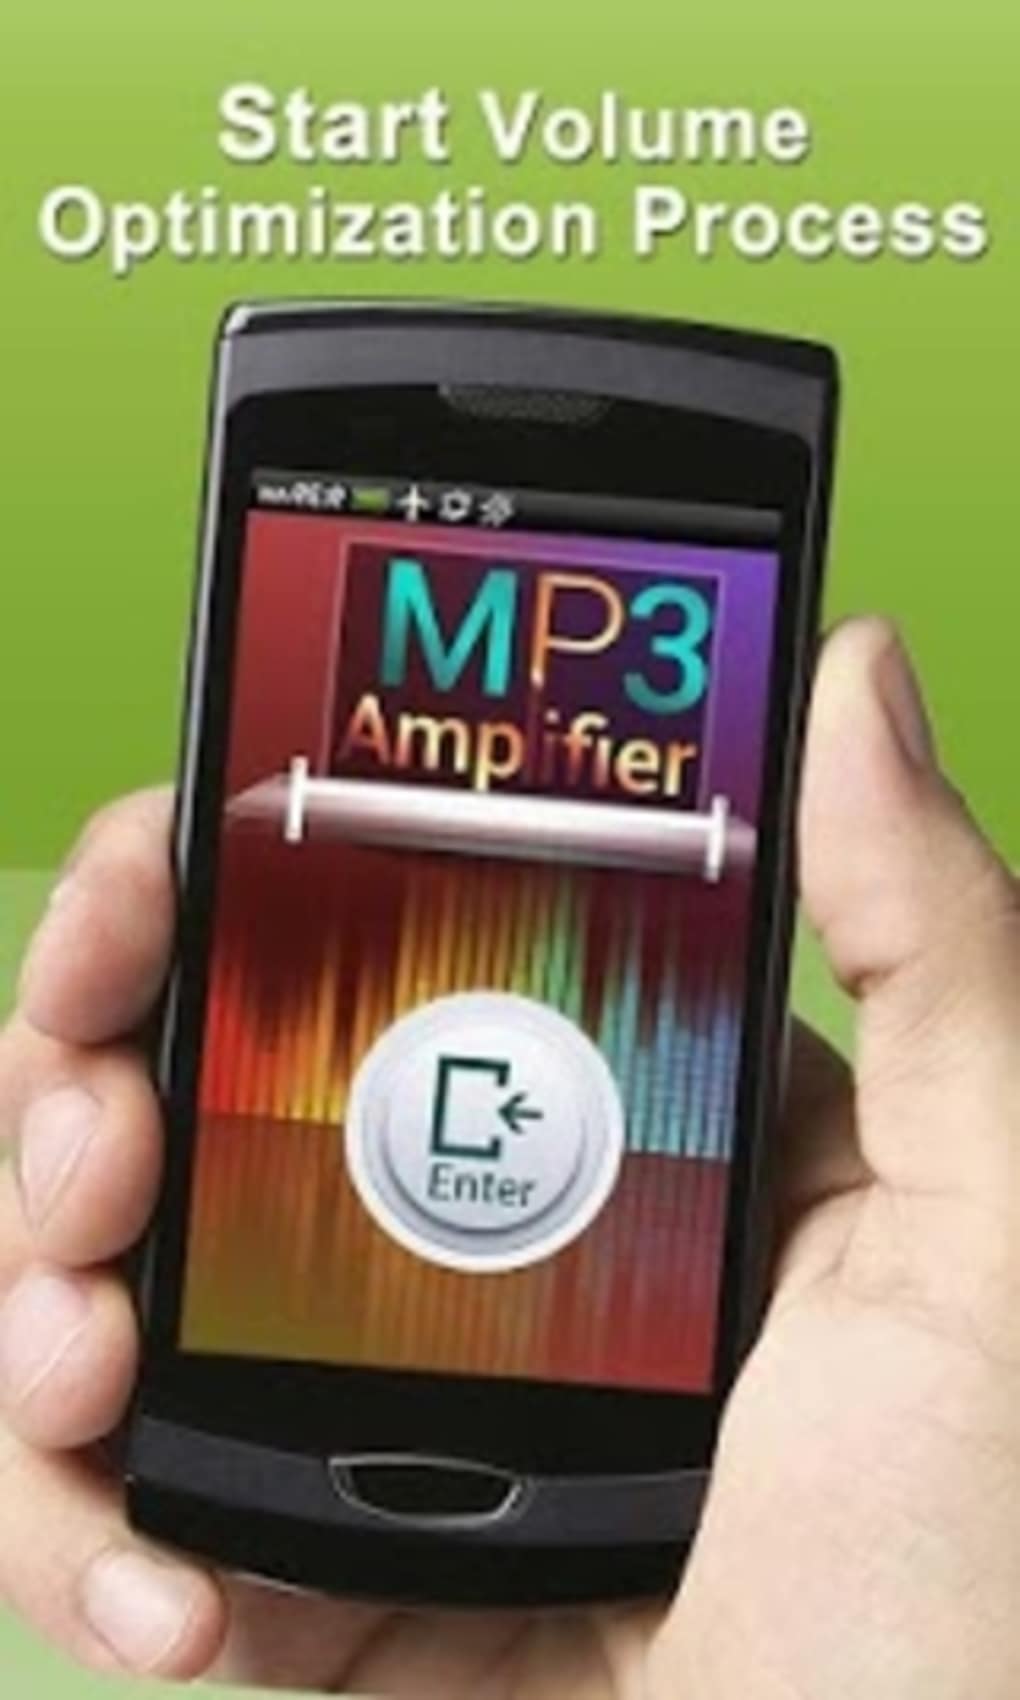 Download amplifier song less mb